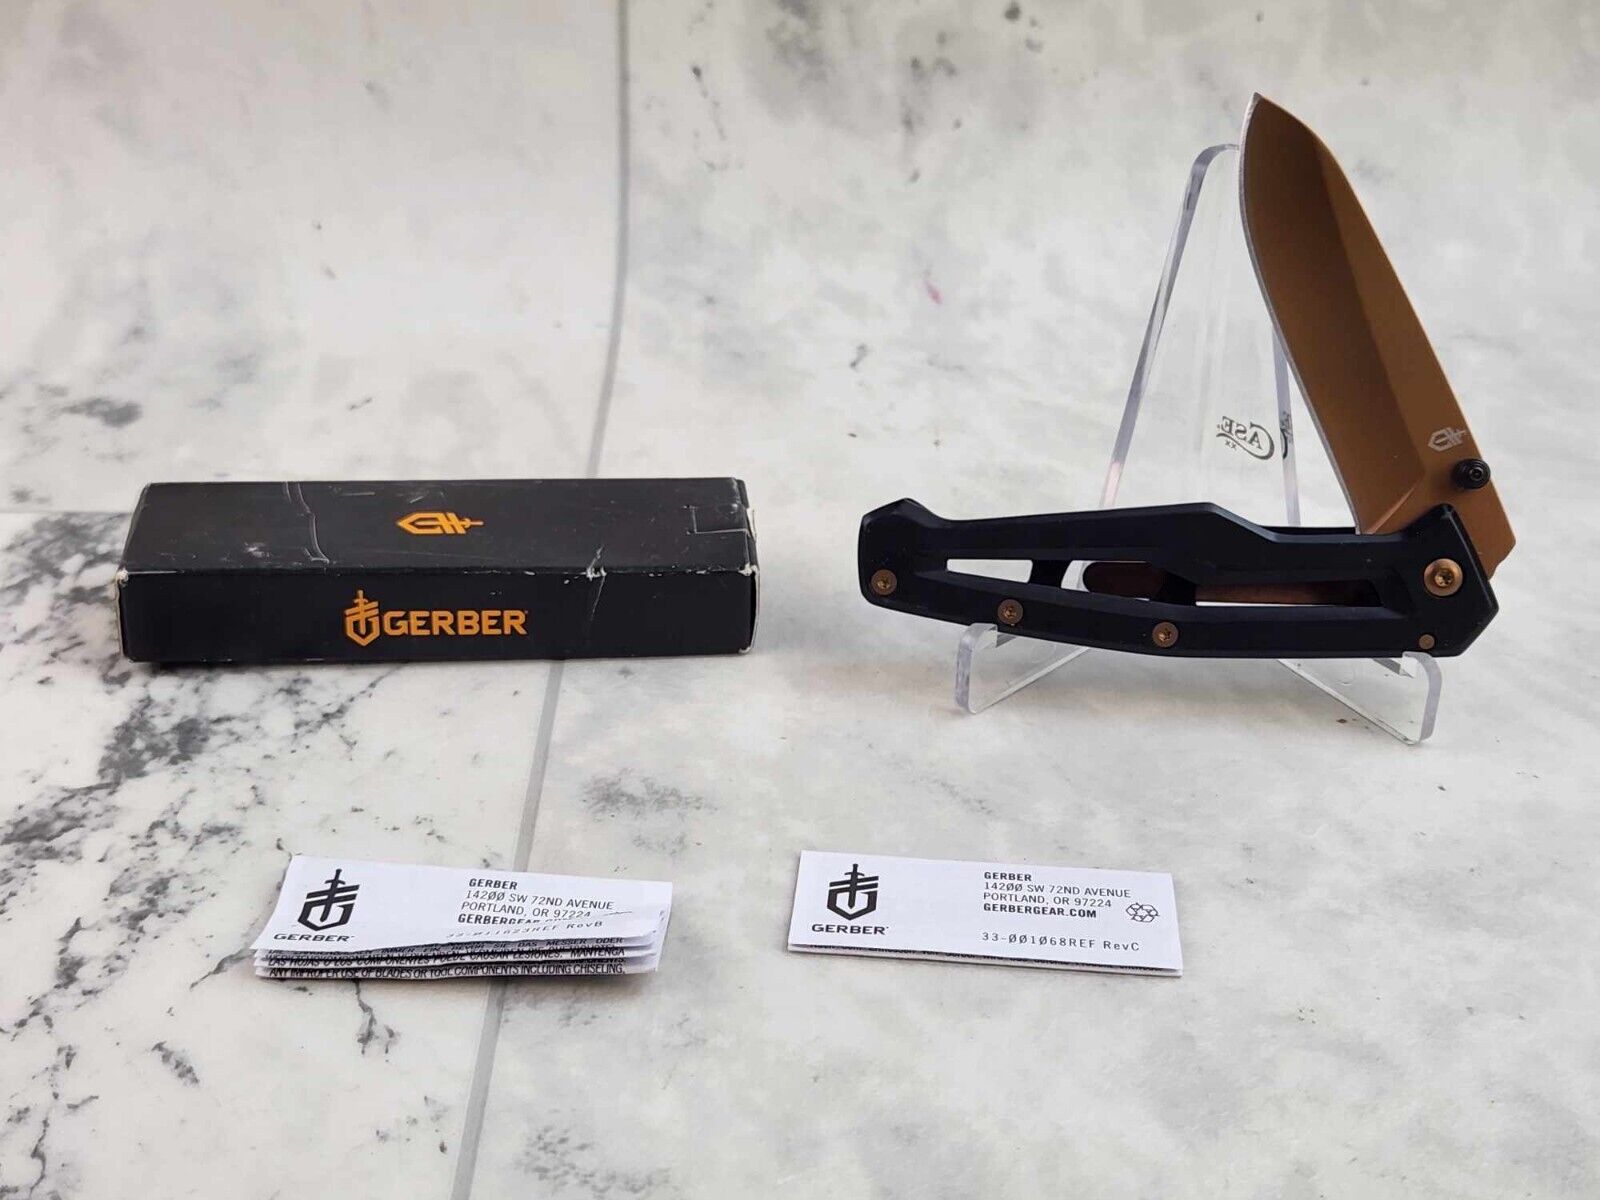 Gerber Paralite Rose Blade folding clip style knife 30-001344 NEW IN BOX